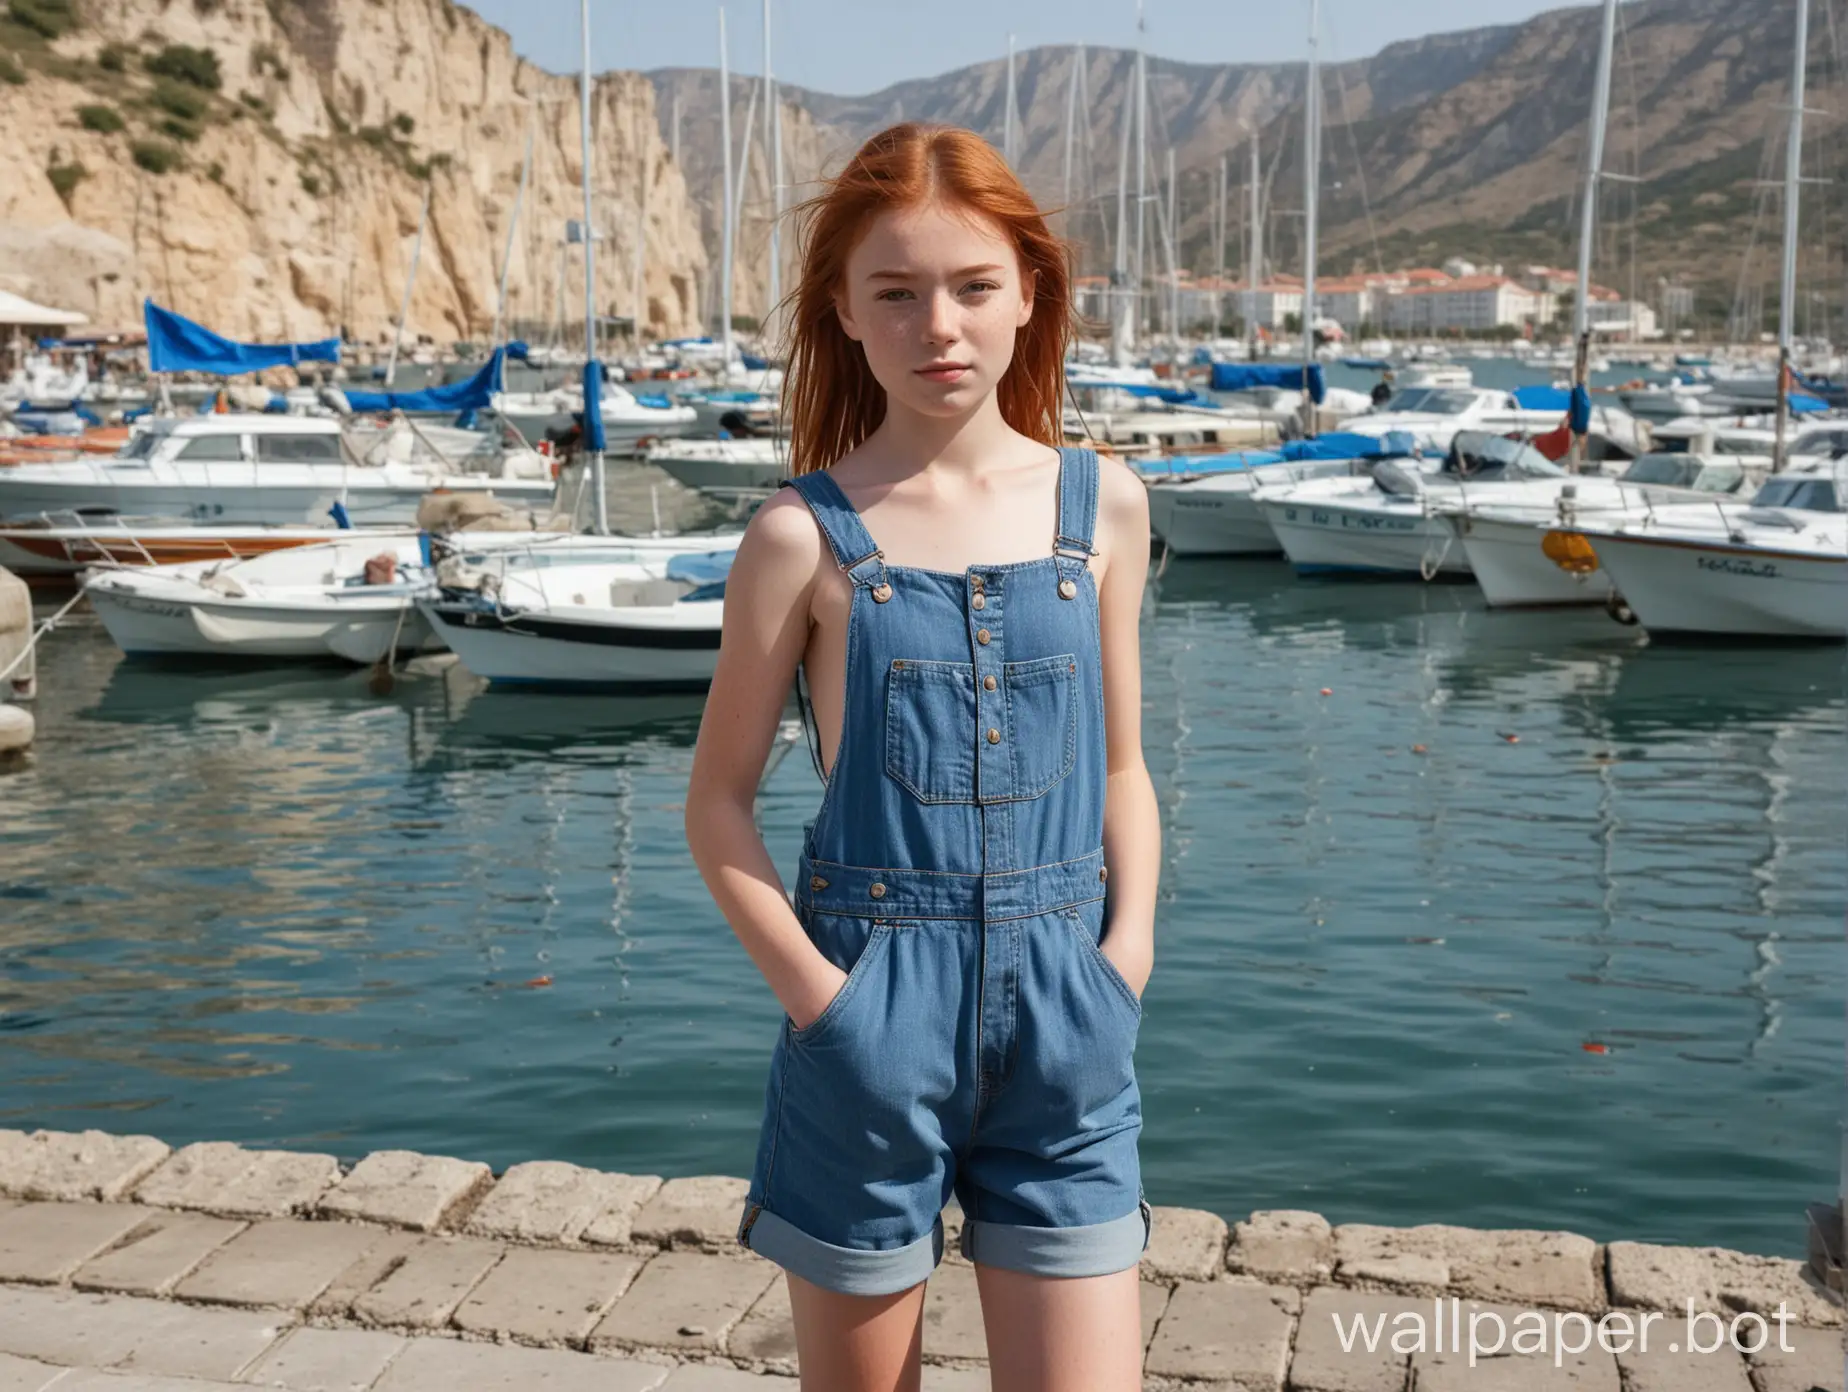 Scenic-Waterfront-View-with-RedHaired-Girl-in-Denim-Jumpsuit